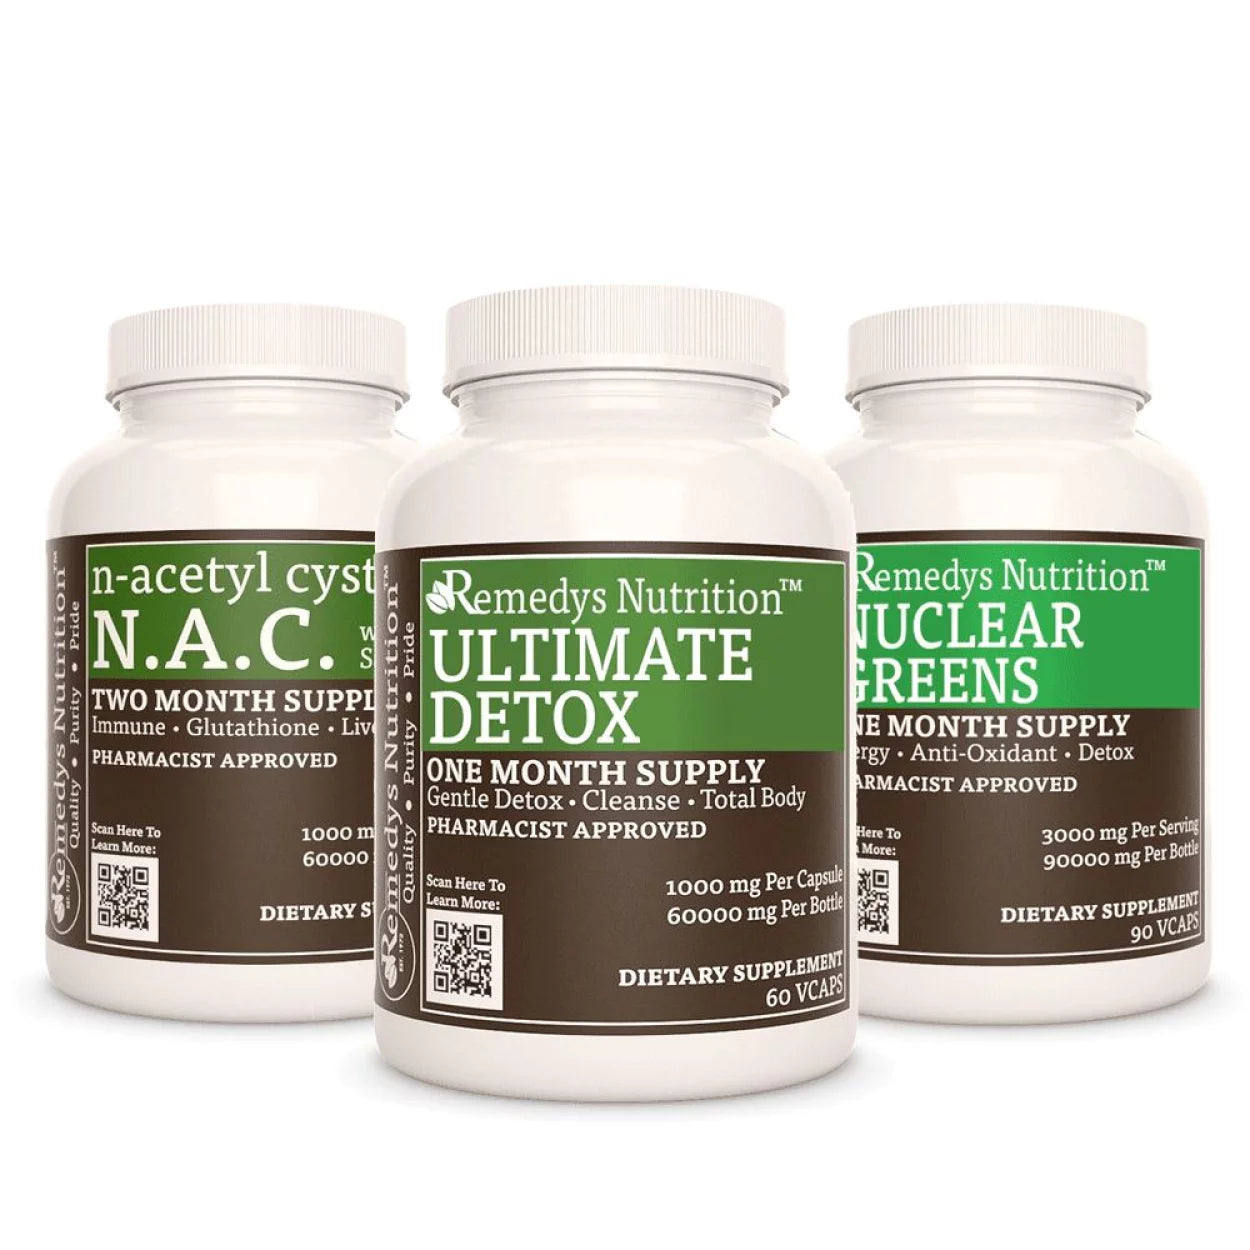 Image of Remedy's Nutrition® Ultimate Detox Power Pack #1™ Herbal Supplement contain Nuclear Greens™ & N-Acetyl Cysteine -NAC